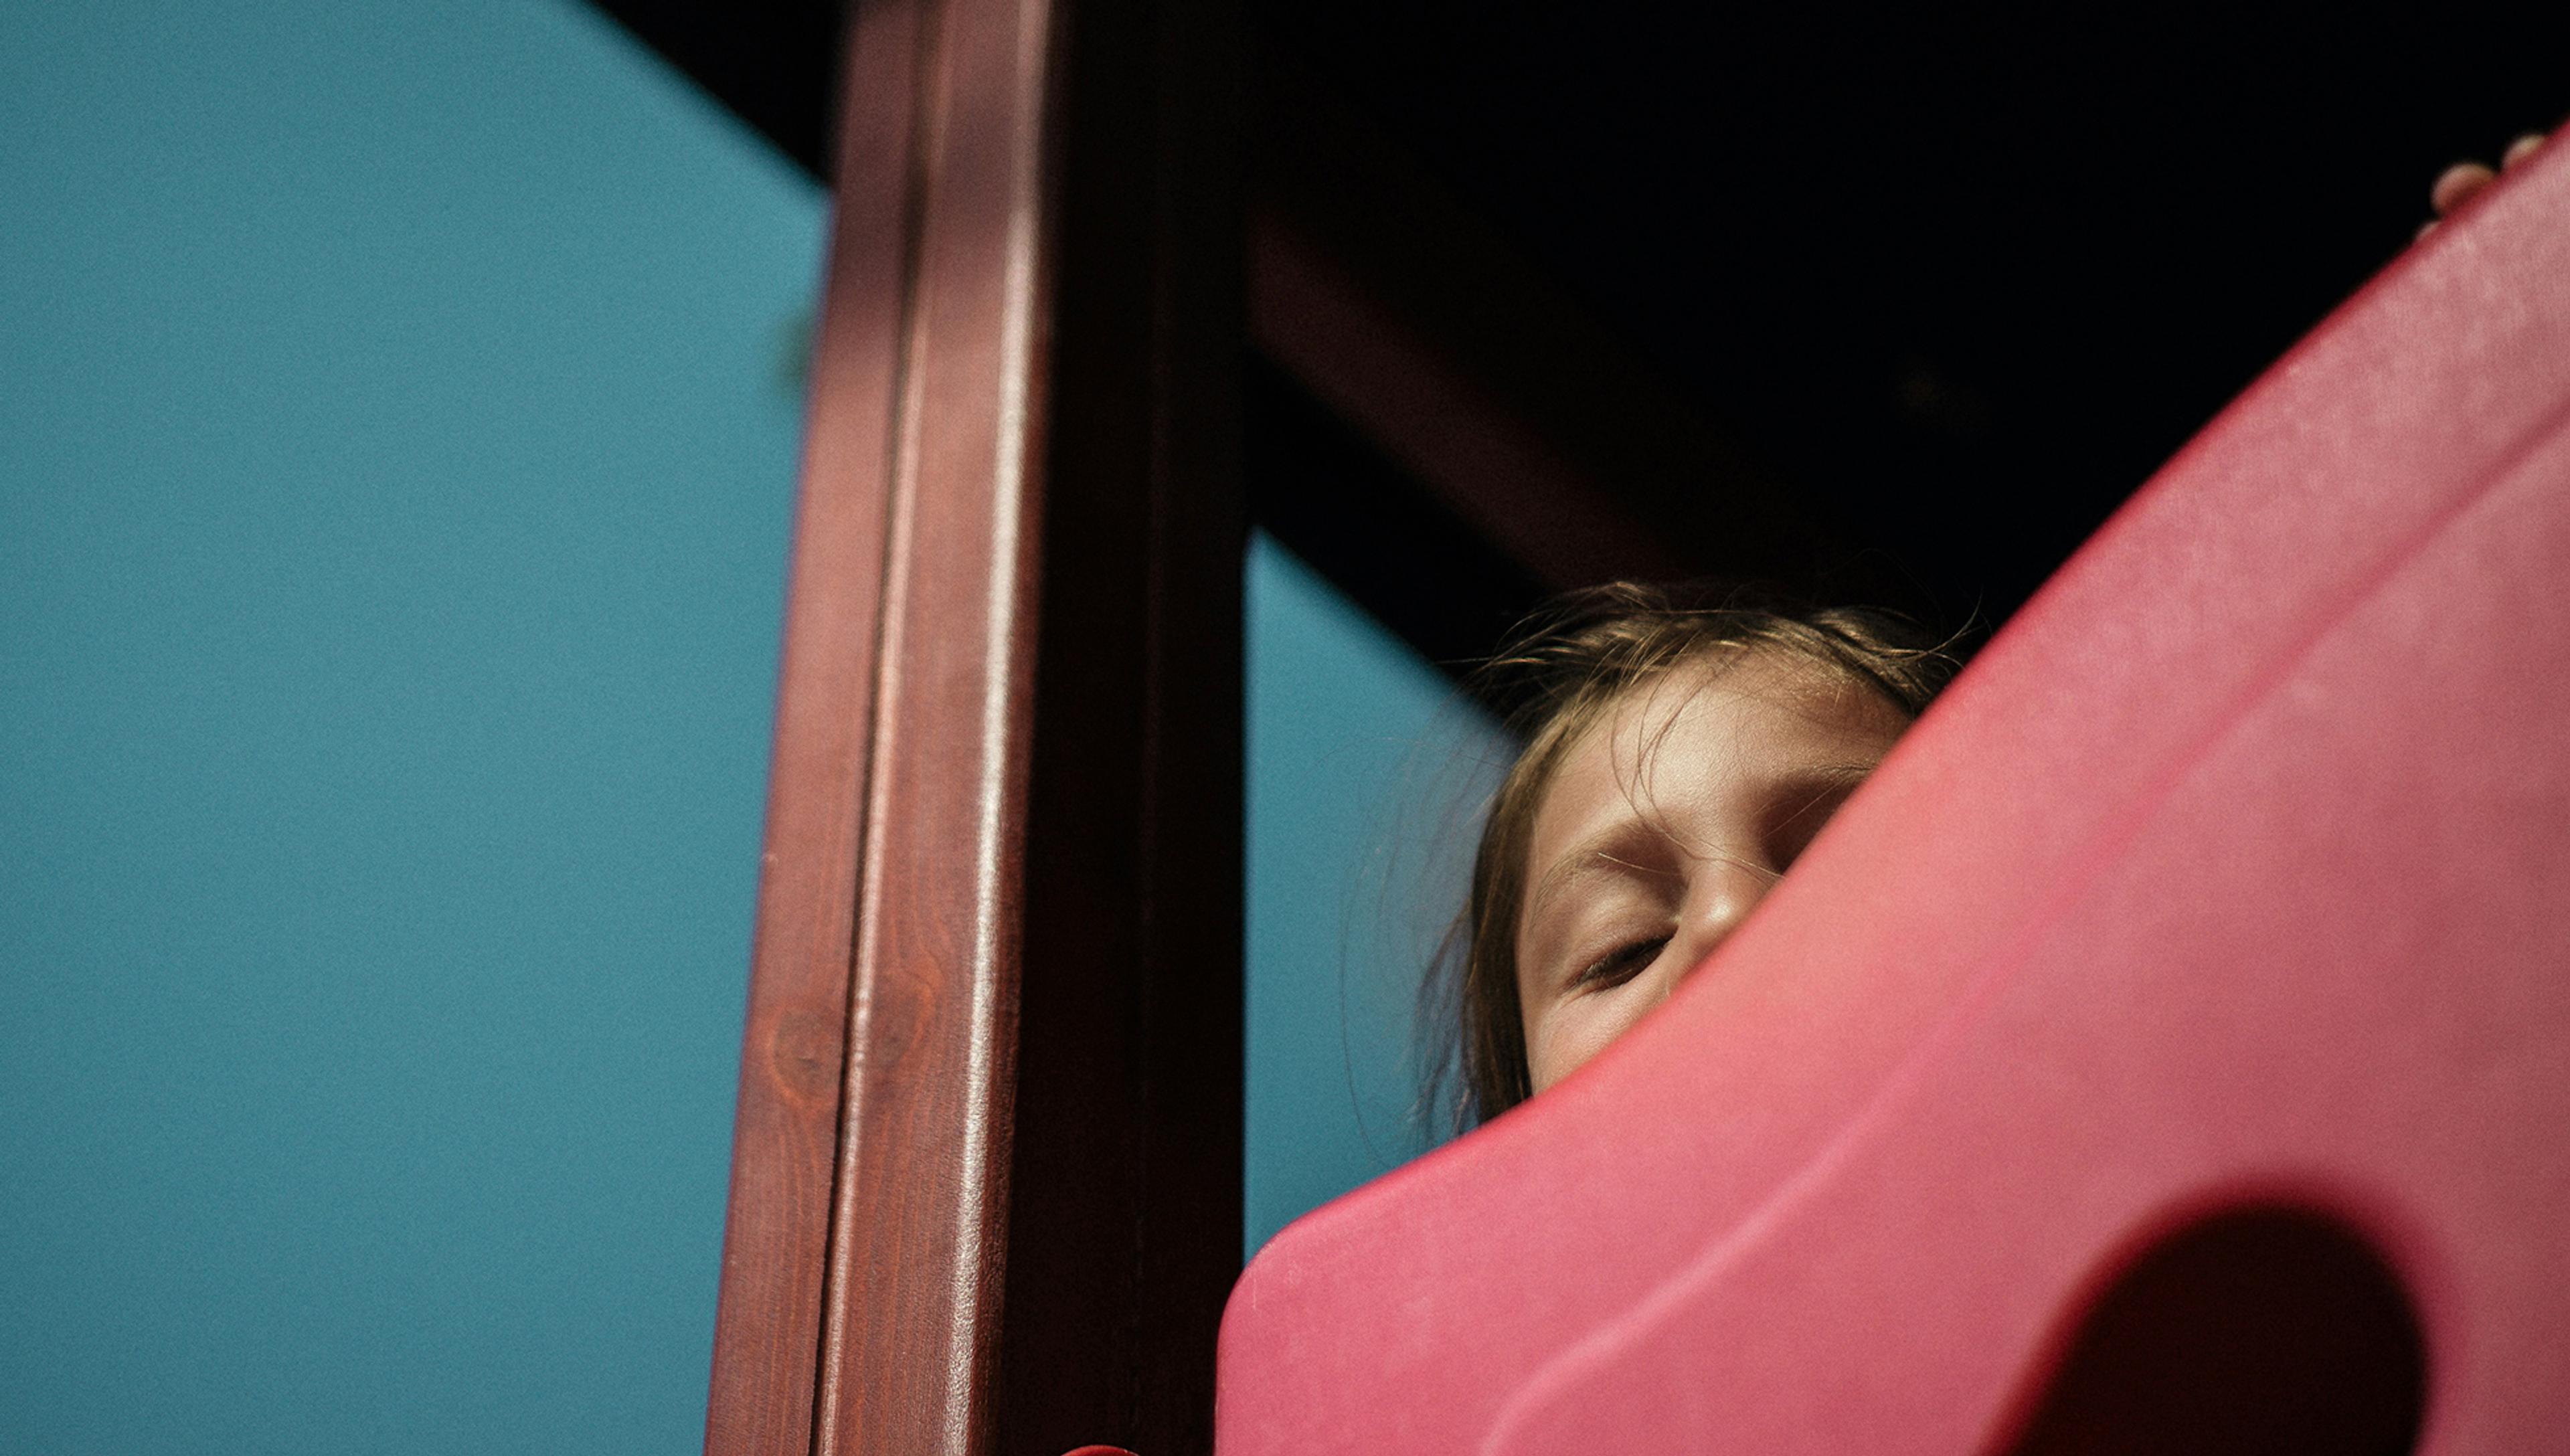 a frightened child whose face is partially obscured peers down from by a play area structure